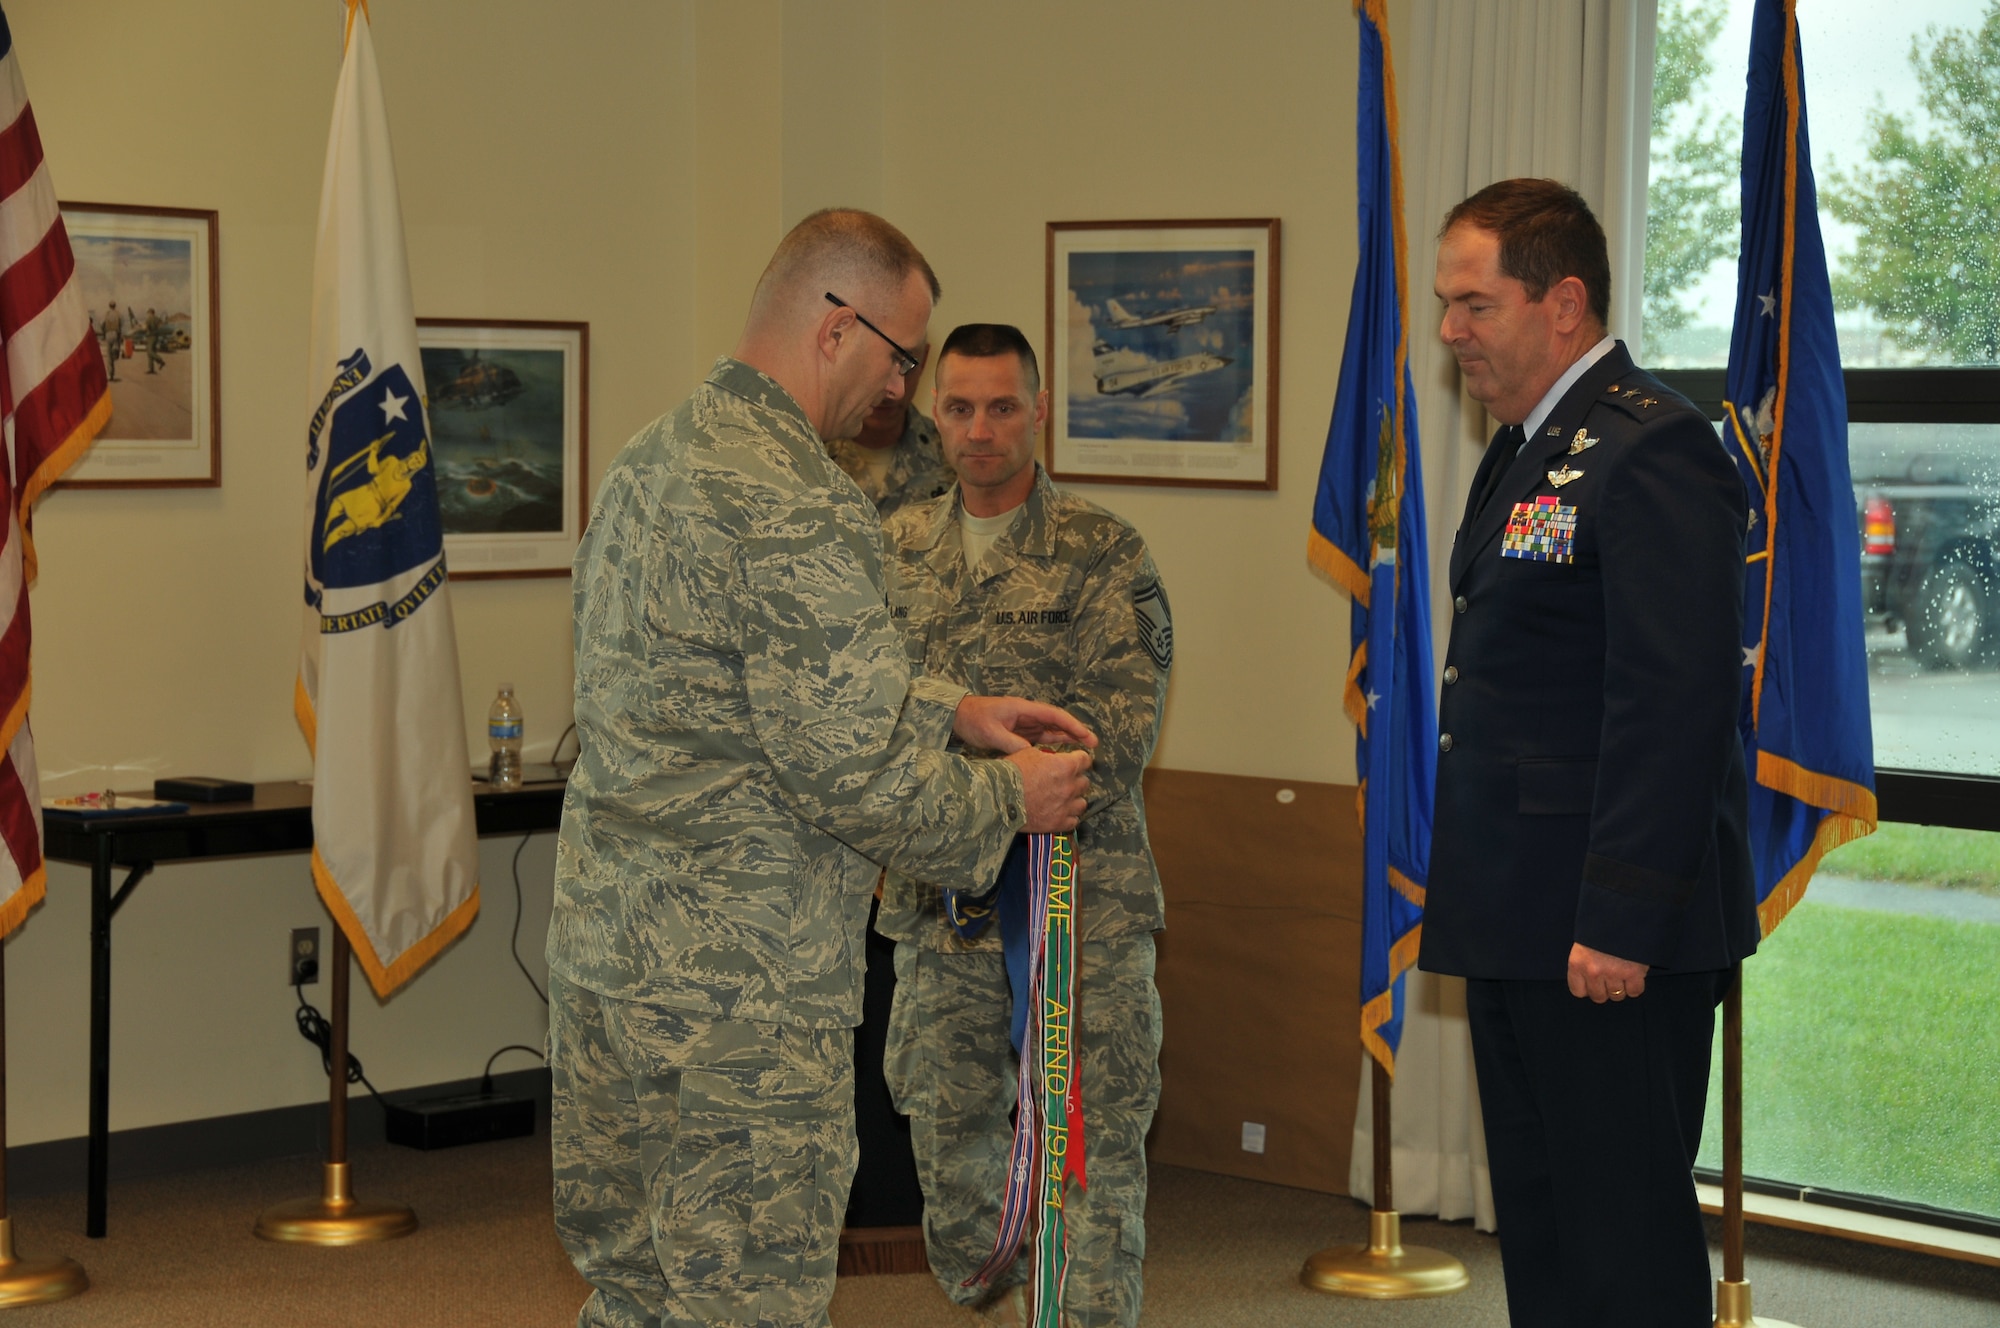 LtCol Joseph Morrissey, commander of the 267th Combat Communications Squadron places the Air Force Outstanding Unit Award on the squadron guide on held by SMSgt Francis Lang. LtCol Morrissey received the unit award from Maj. General Michael Akey, MA ANG Commander on October 3, 2009. US Air Force photo by TSgt Andrew Reitano